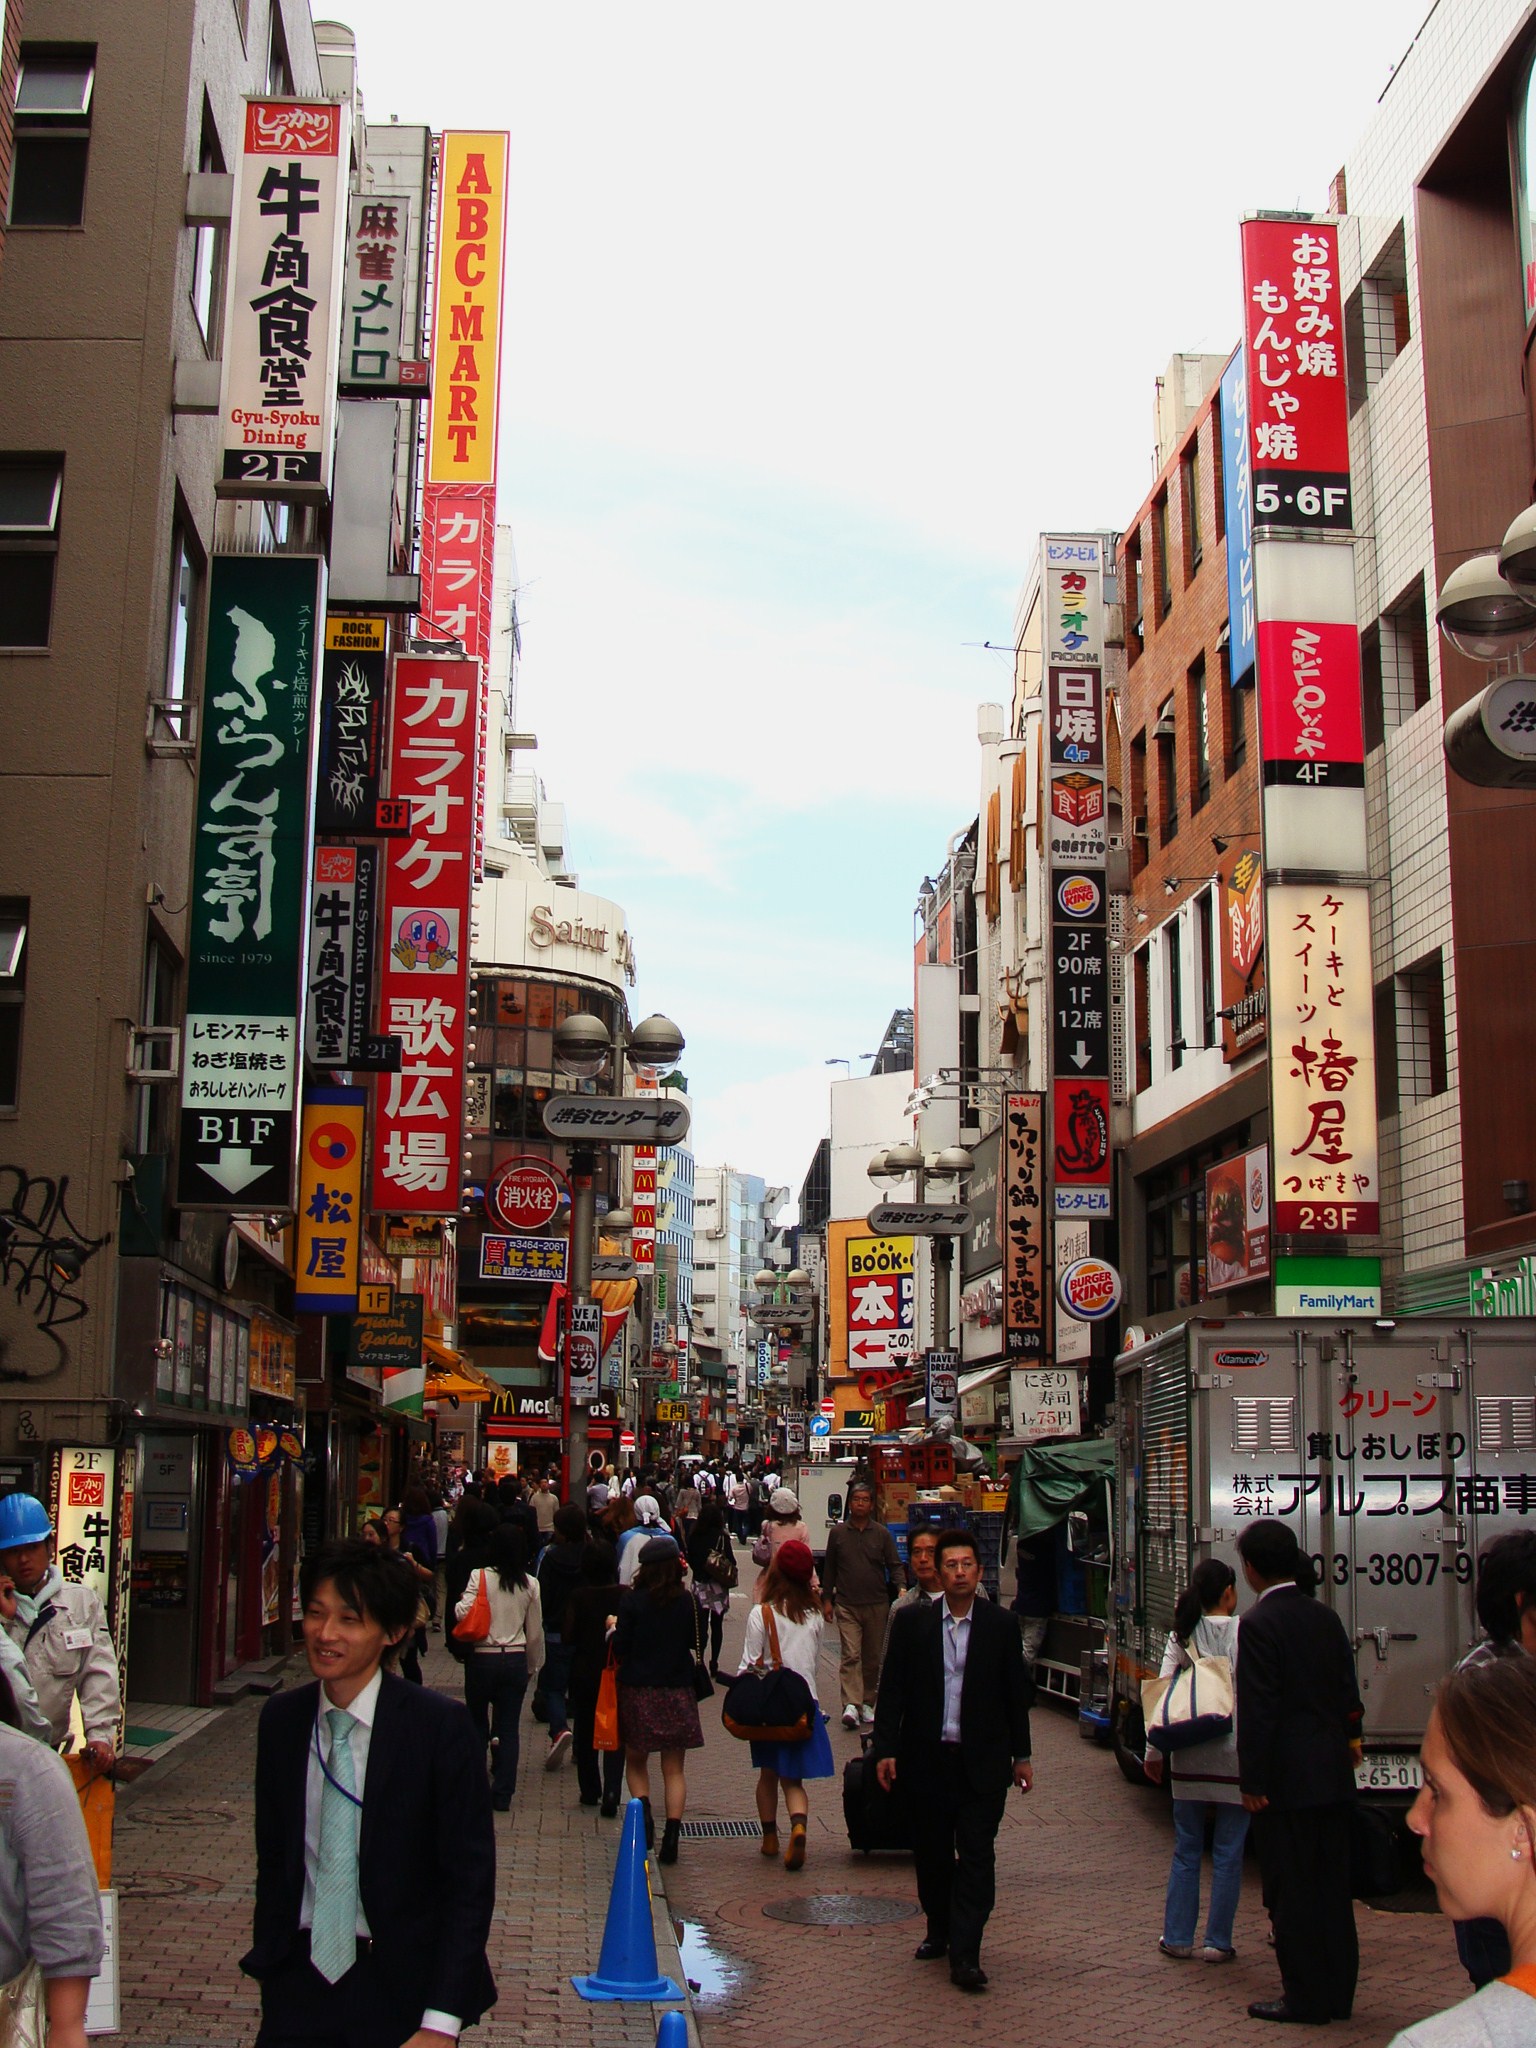 a crowded asian street lined with signs and people